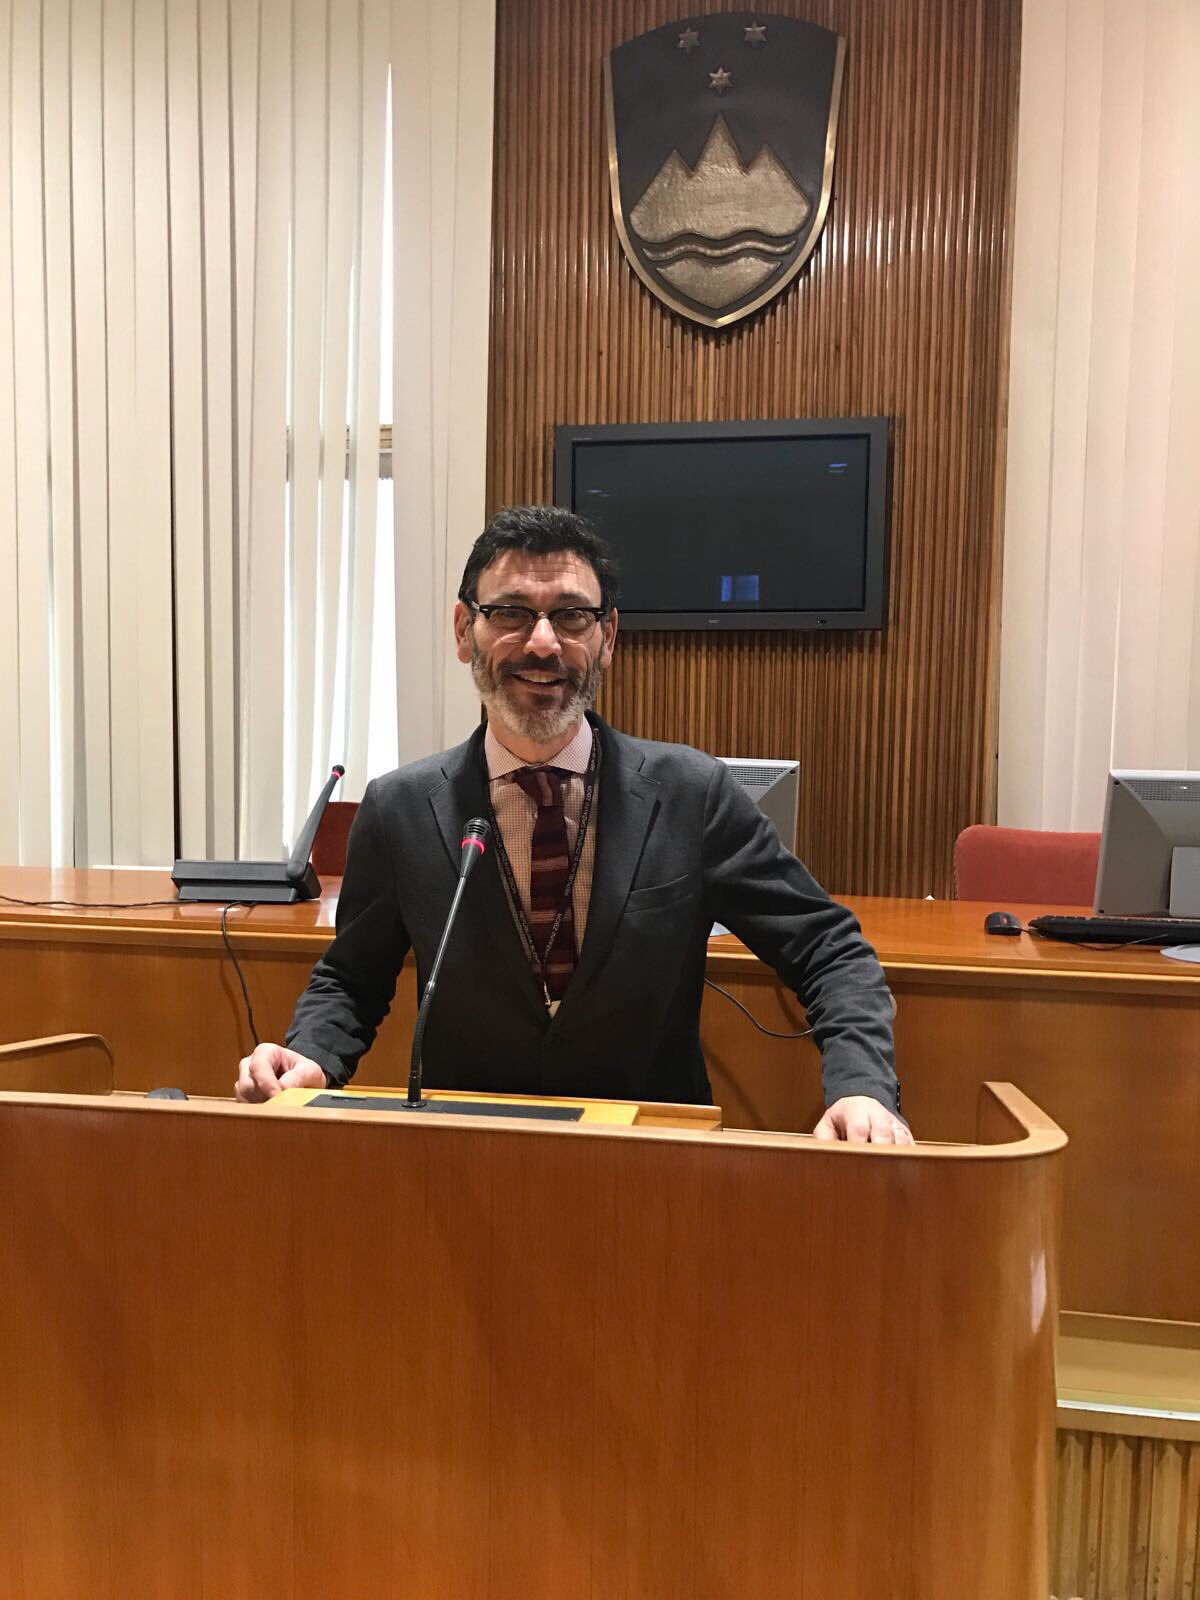 Andrew speaking in Slovenian parliament on Representation of Roma in Slovenia - December 2017